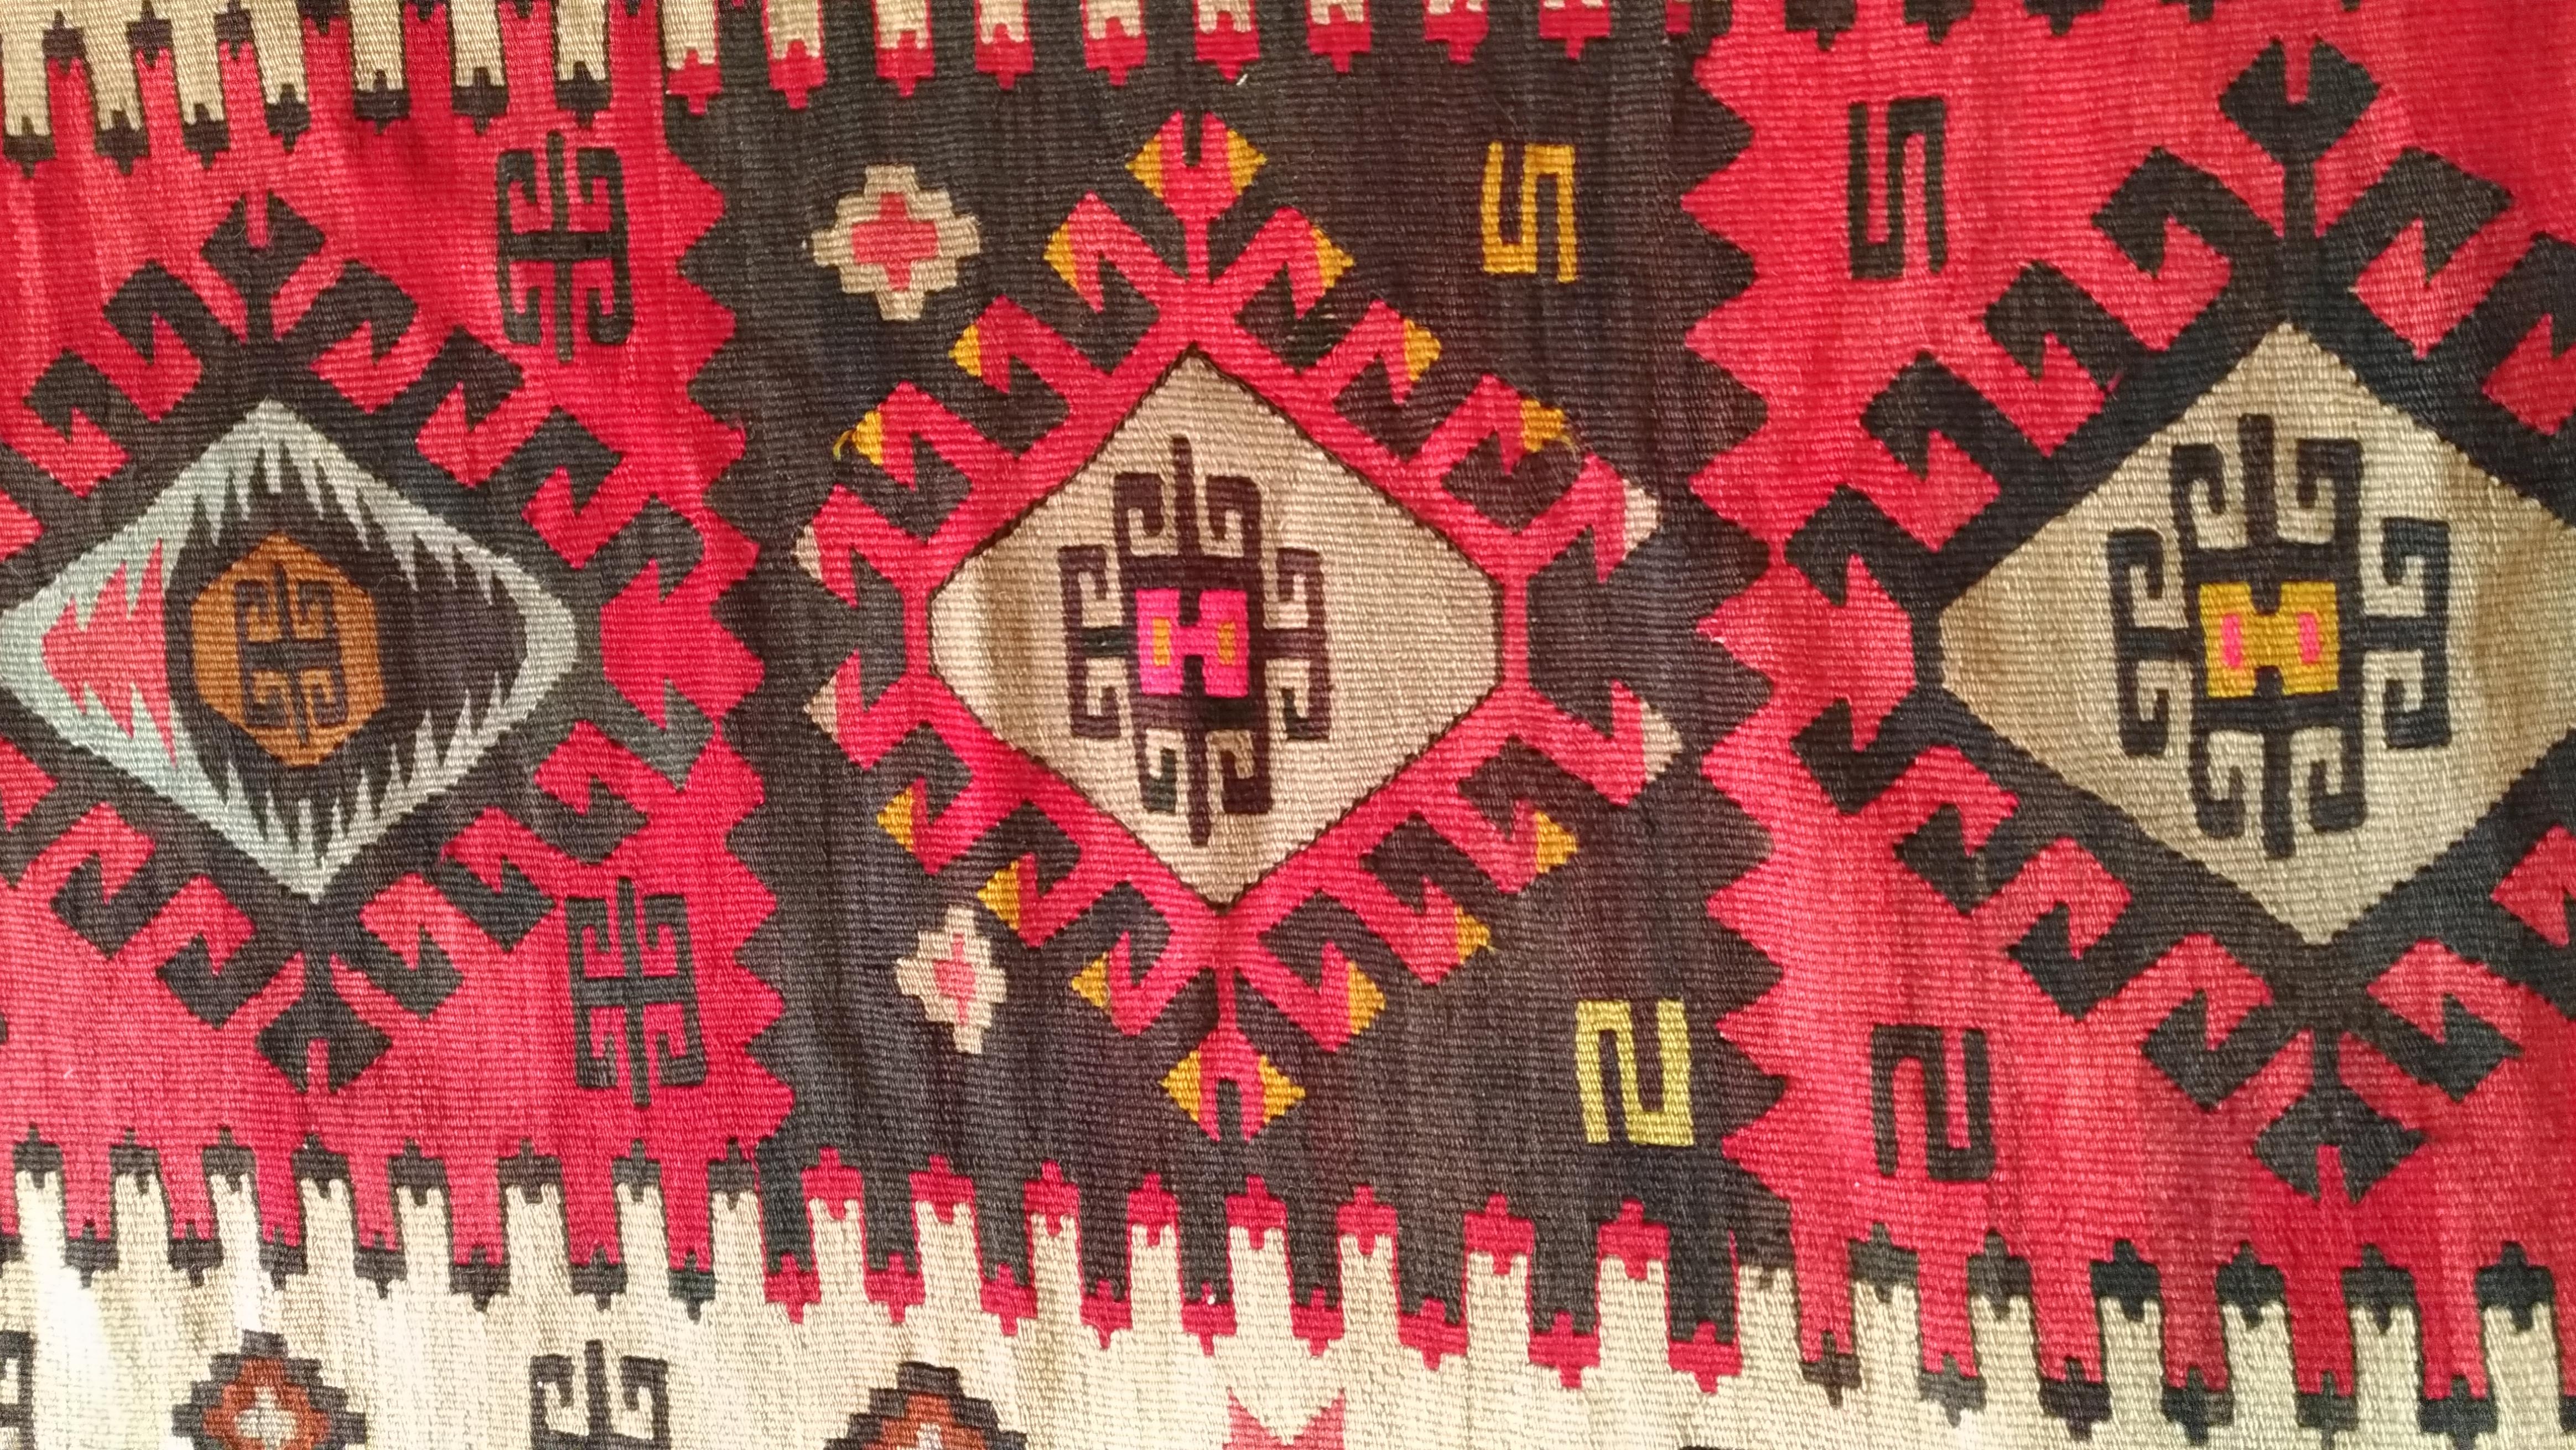 944 - Nice mid 19th century Turkish kilim rug, with geometric design and pretty colors with red, pink, orange, yellow, blue and gray, completely hand-woven with wool on wool.